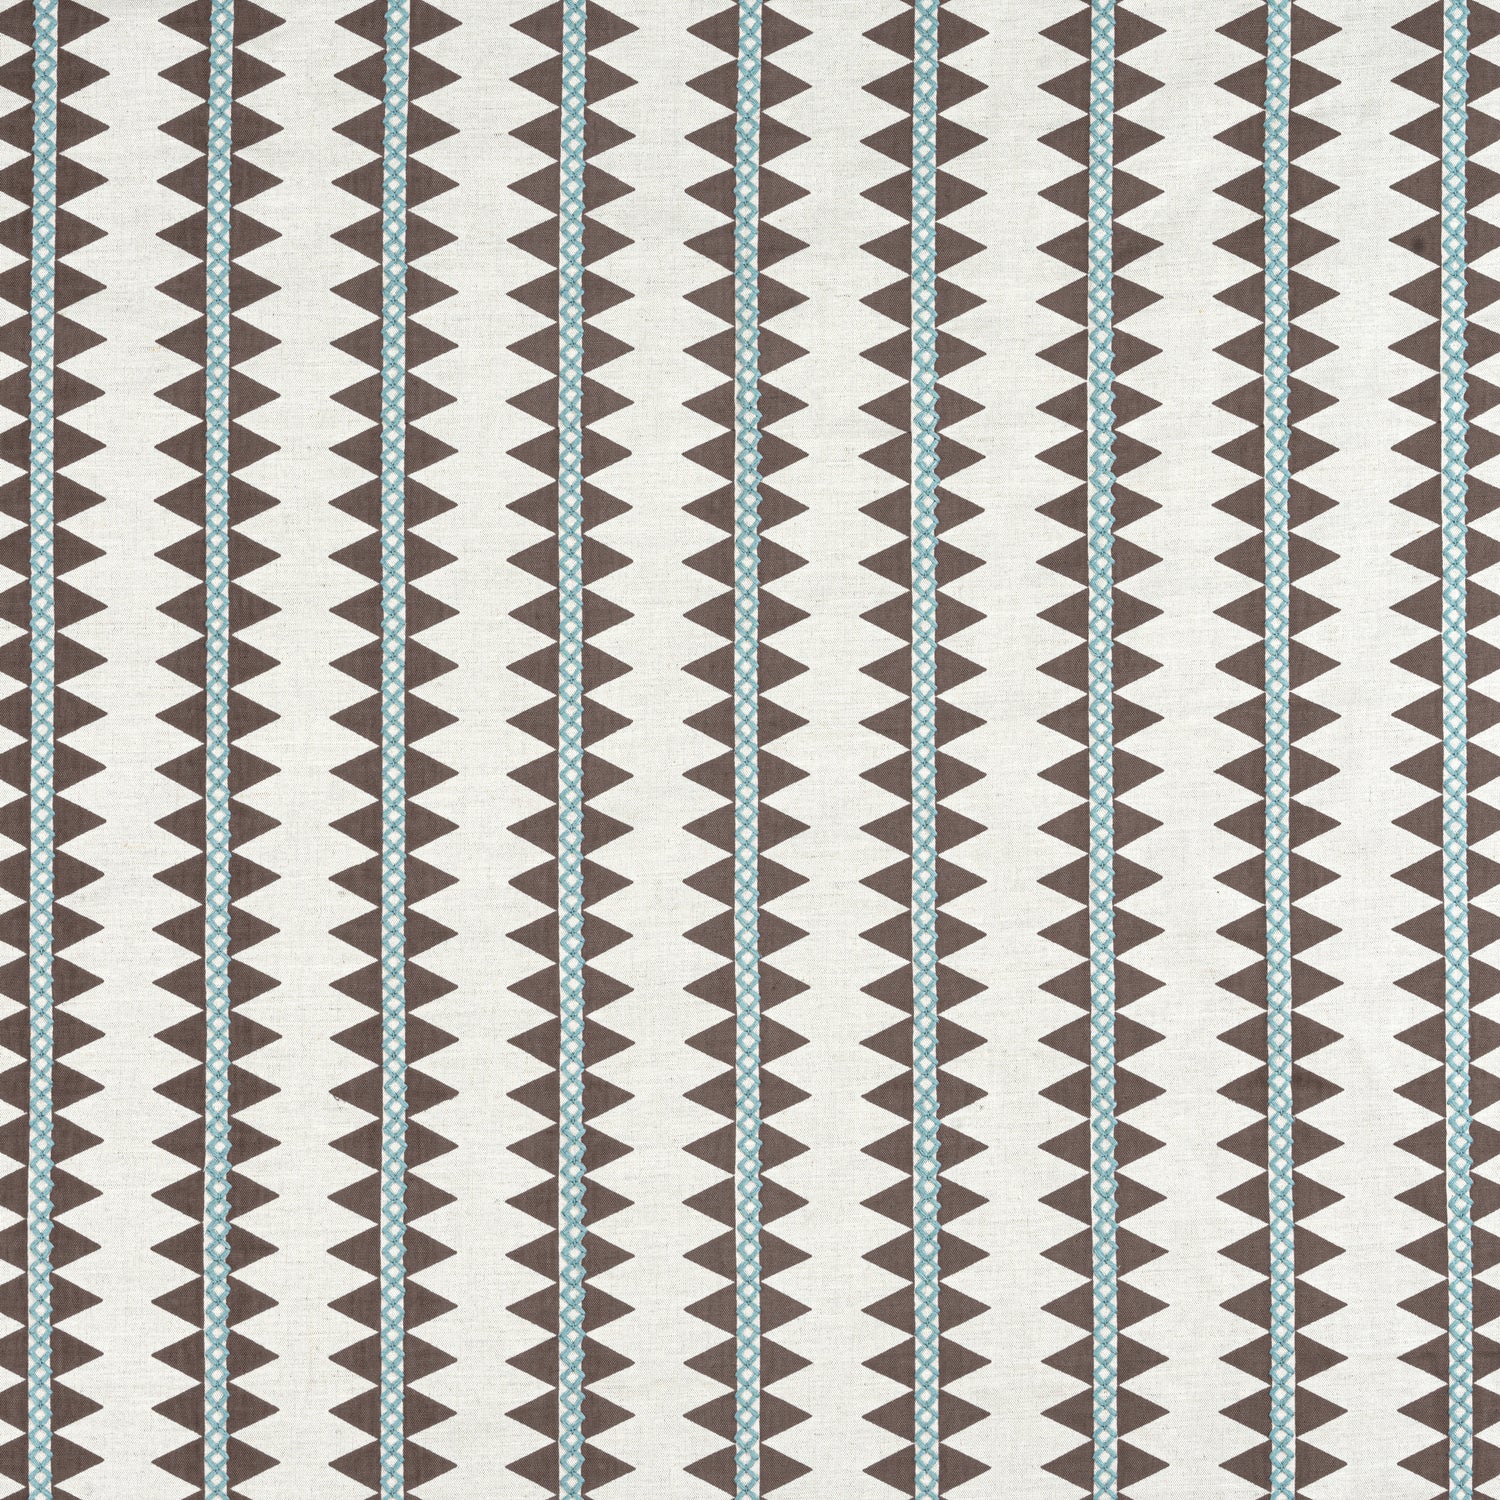 Reno Stripe Embroidery fabric in brown color - pattern number W713246 - by Thibaut in the Mesa Fabrics collection